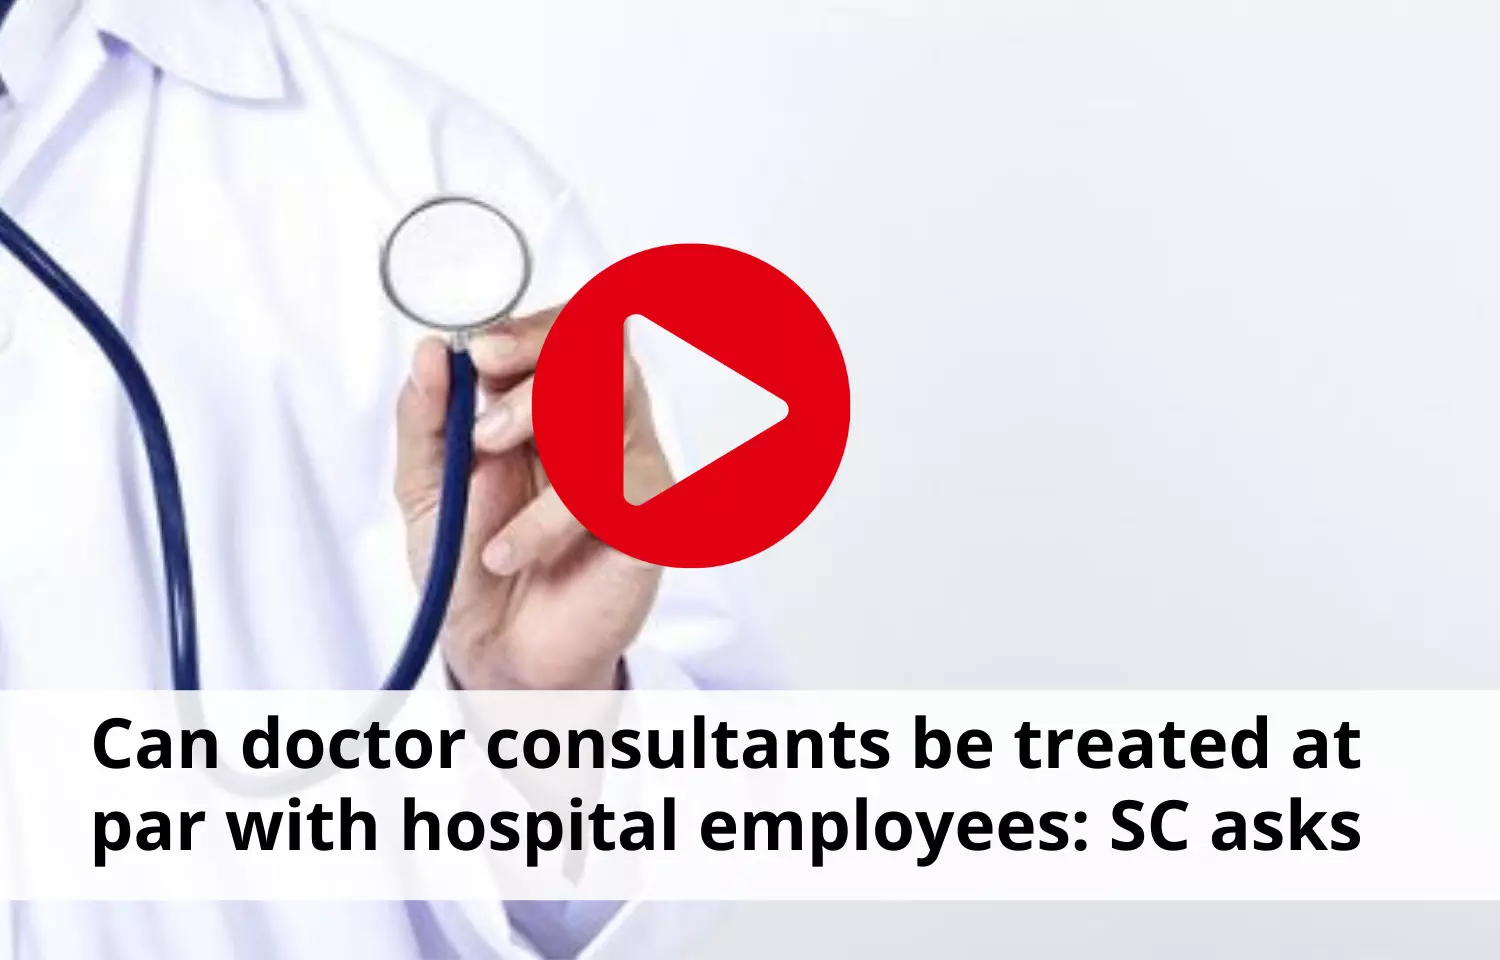 Can doctor consultants be treated at par with hospital employees: SC asks